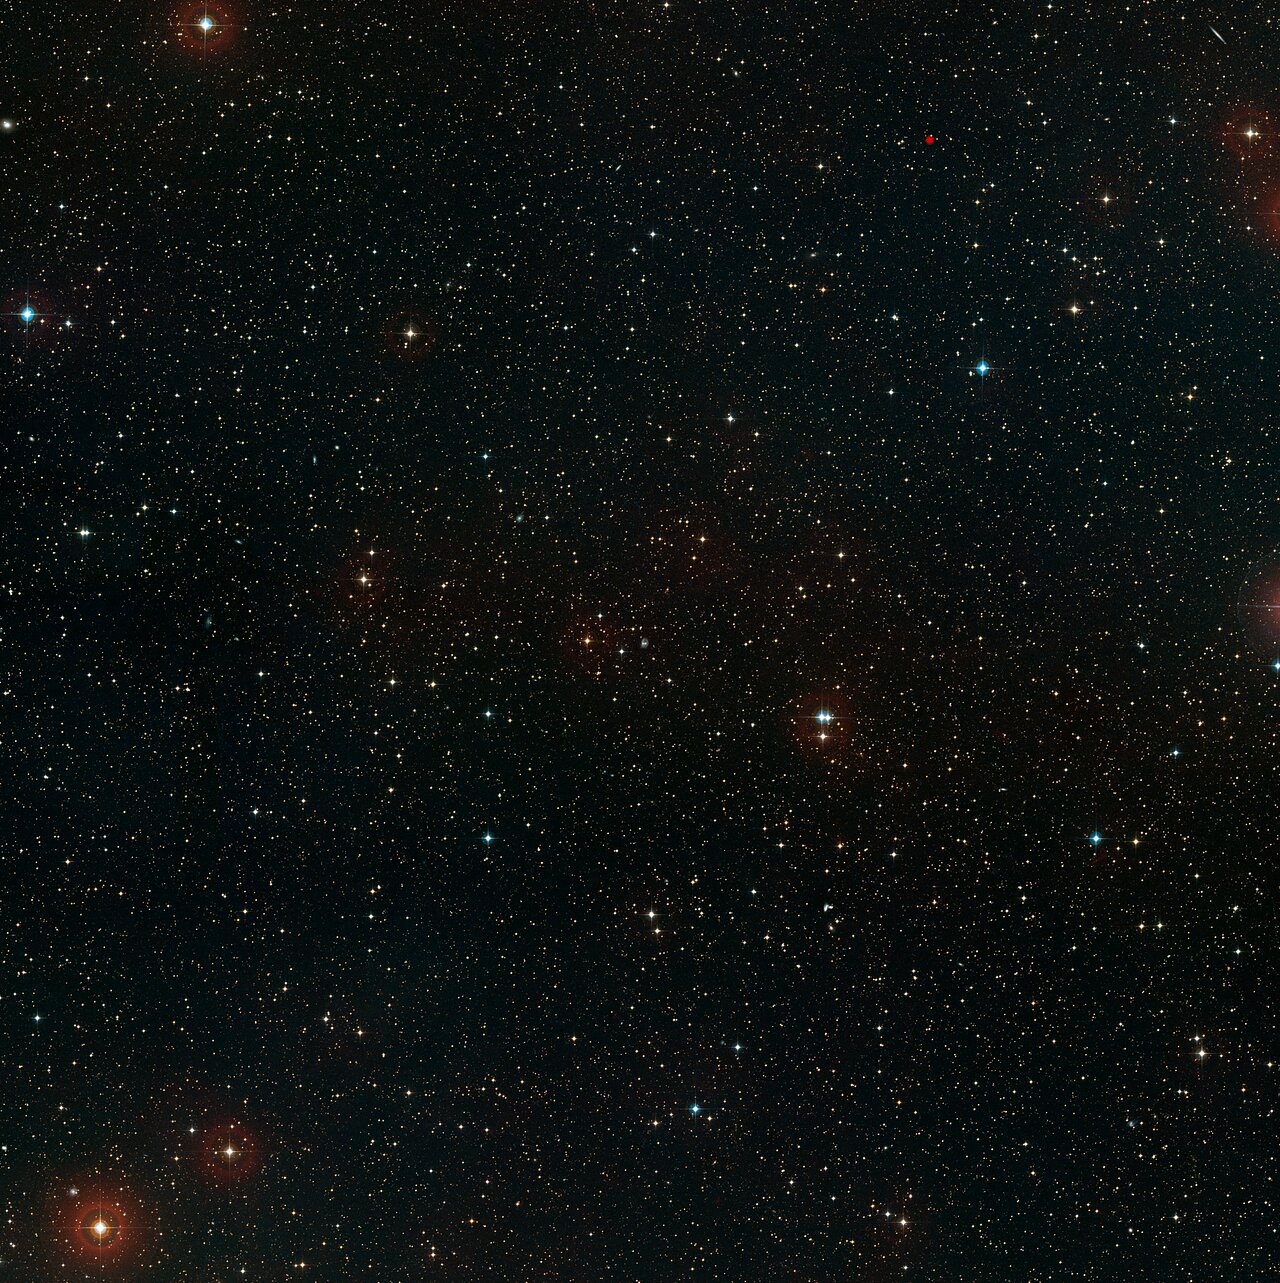 This image shows a ground-based wide-field view of the region around NGC 6752 from the Digitized Sky Survey 2.  Credit:ESA/Digitized Sky Survey 2 Acknowledgement: Davide De Martin